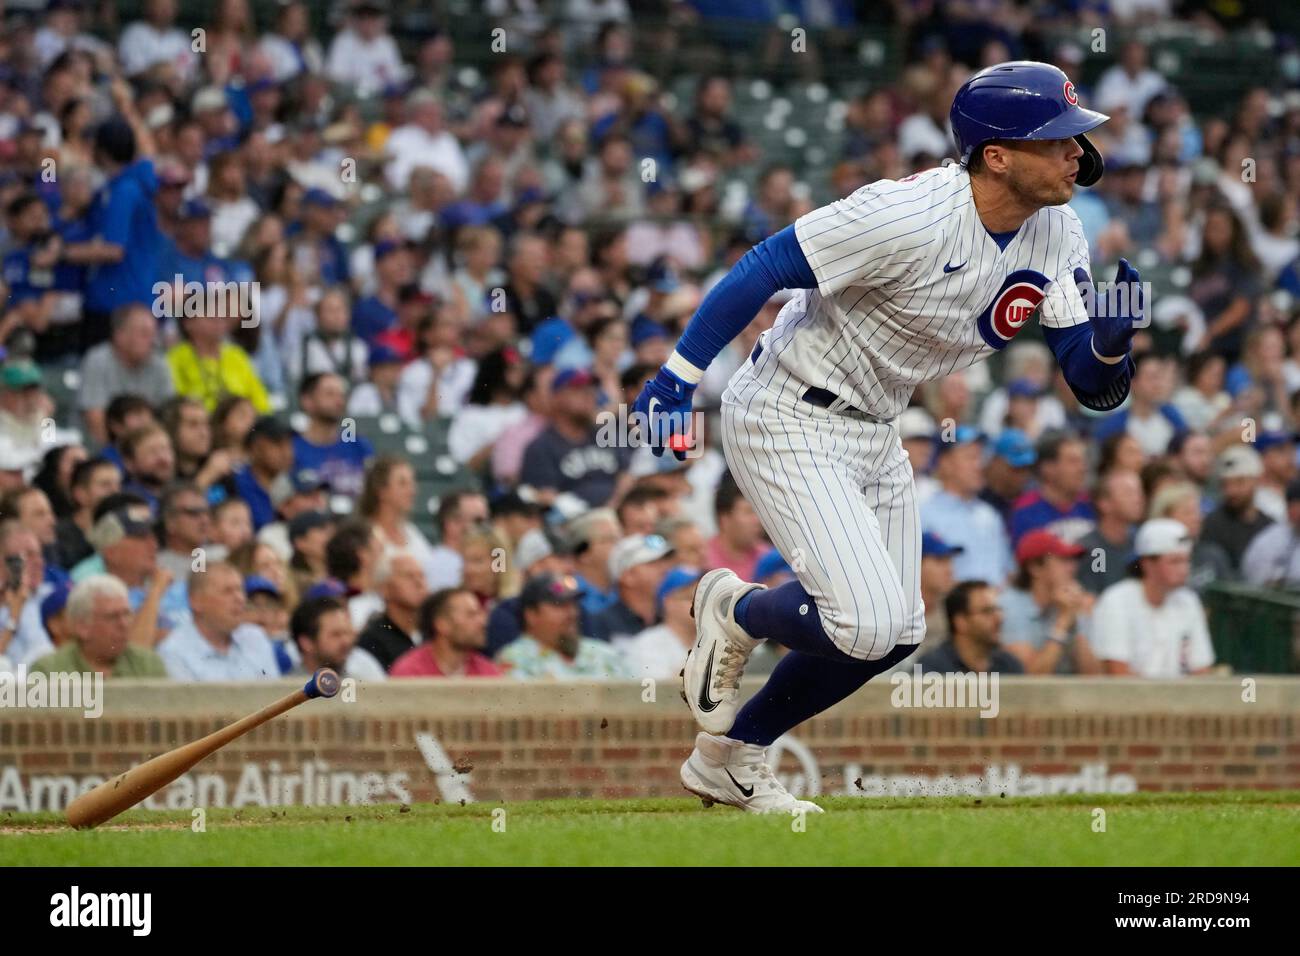 Chicago Cubs' Nico Hoerner runs after hitting a single against the